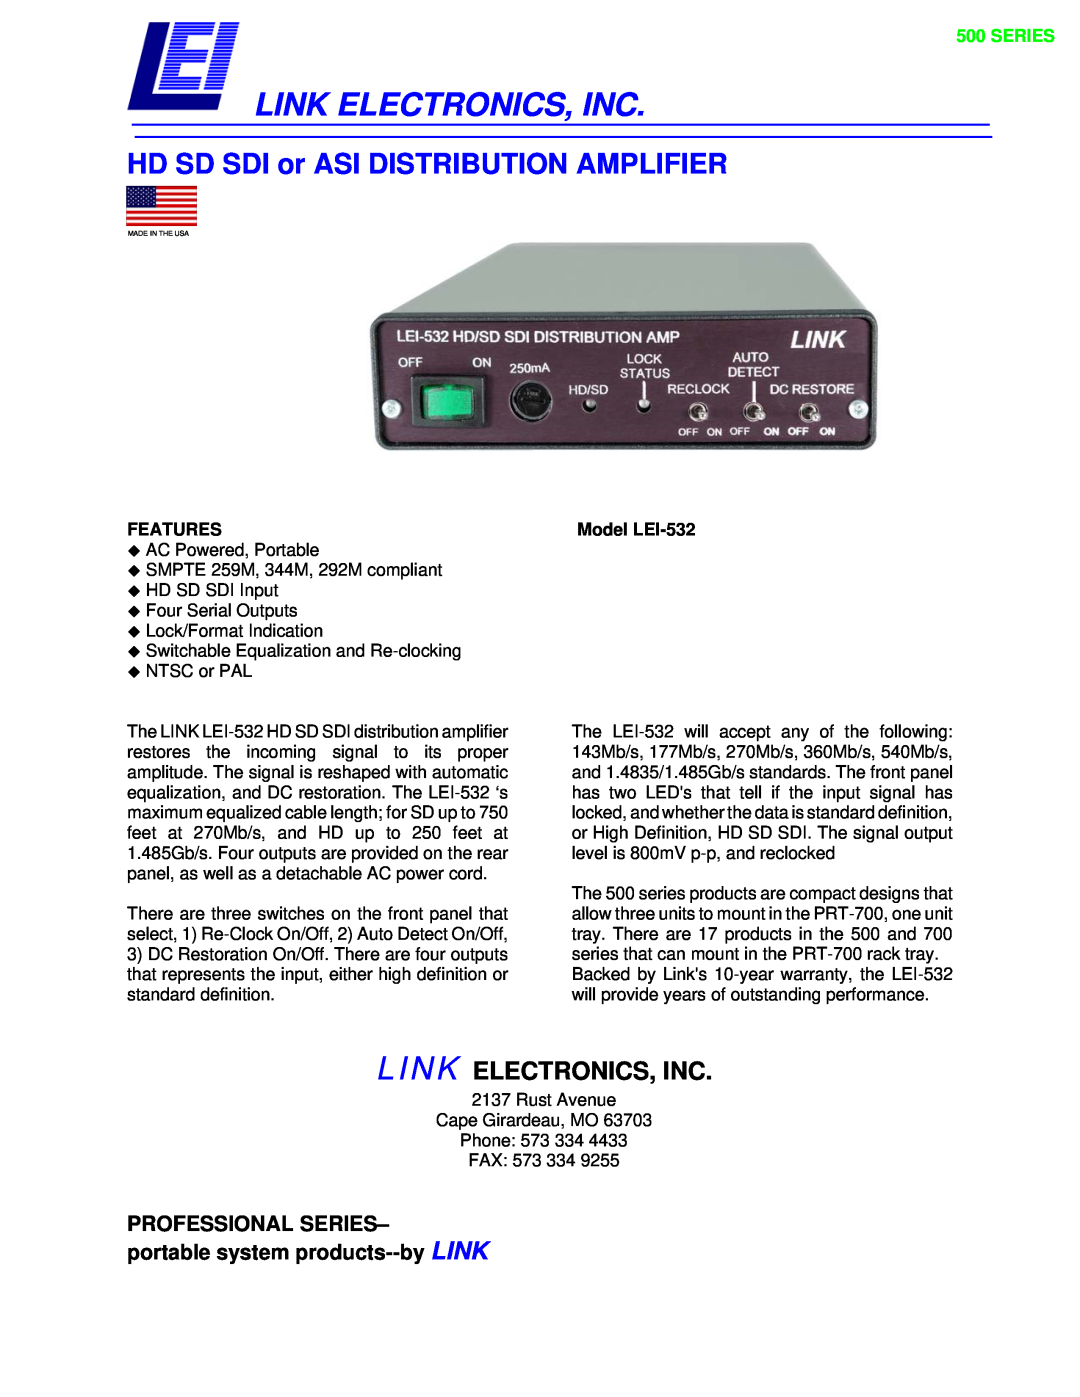 Link electronic warranty Professional Series, portable system products--by LINK, Features, Model LEI-532 